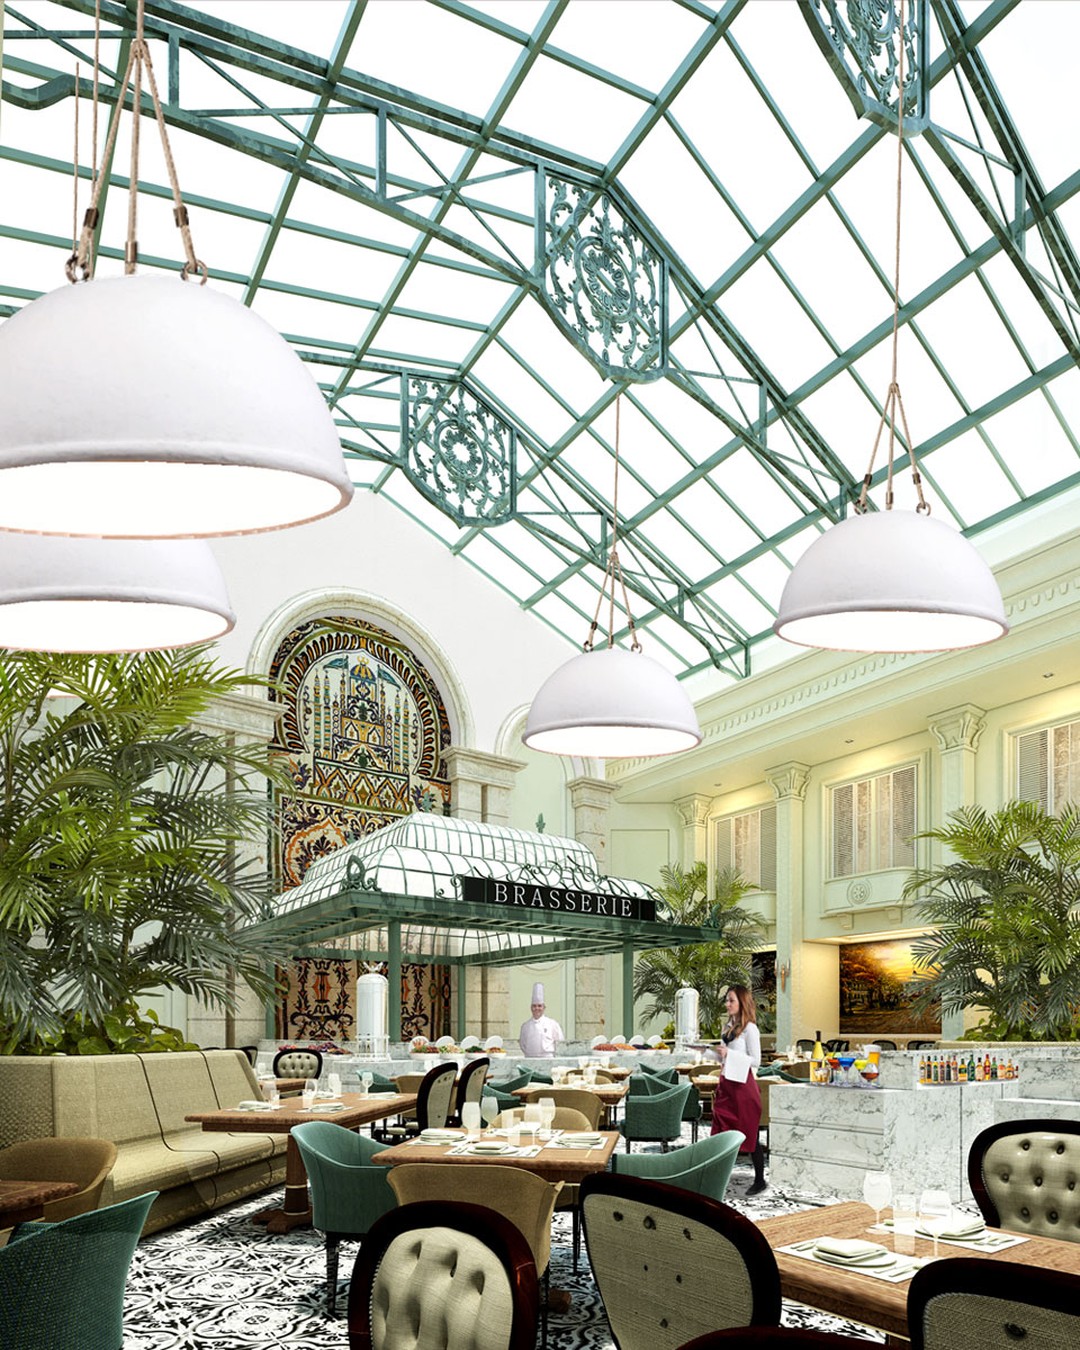 Panoramic skylight delivers the beauty of natural afternoon sky and reflects it on the European-style restaurant.
.
🎖Our project : The Heritage, Kempinski Hotel
.
.
Leo Design Group
Interior Design • Architectural Services • Pre-construction Services
• Facebook : Leo Design Group
• Website : https://leodesign.group
• Tel : +66 2-261-7733
• Email : contact@leodesign.group
.
#interiordesign #interiordesigner #hospitalitydesign #hoteldesign #luxuryhomes #leodesigngroup